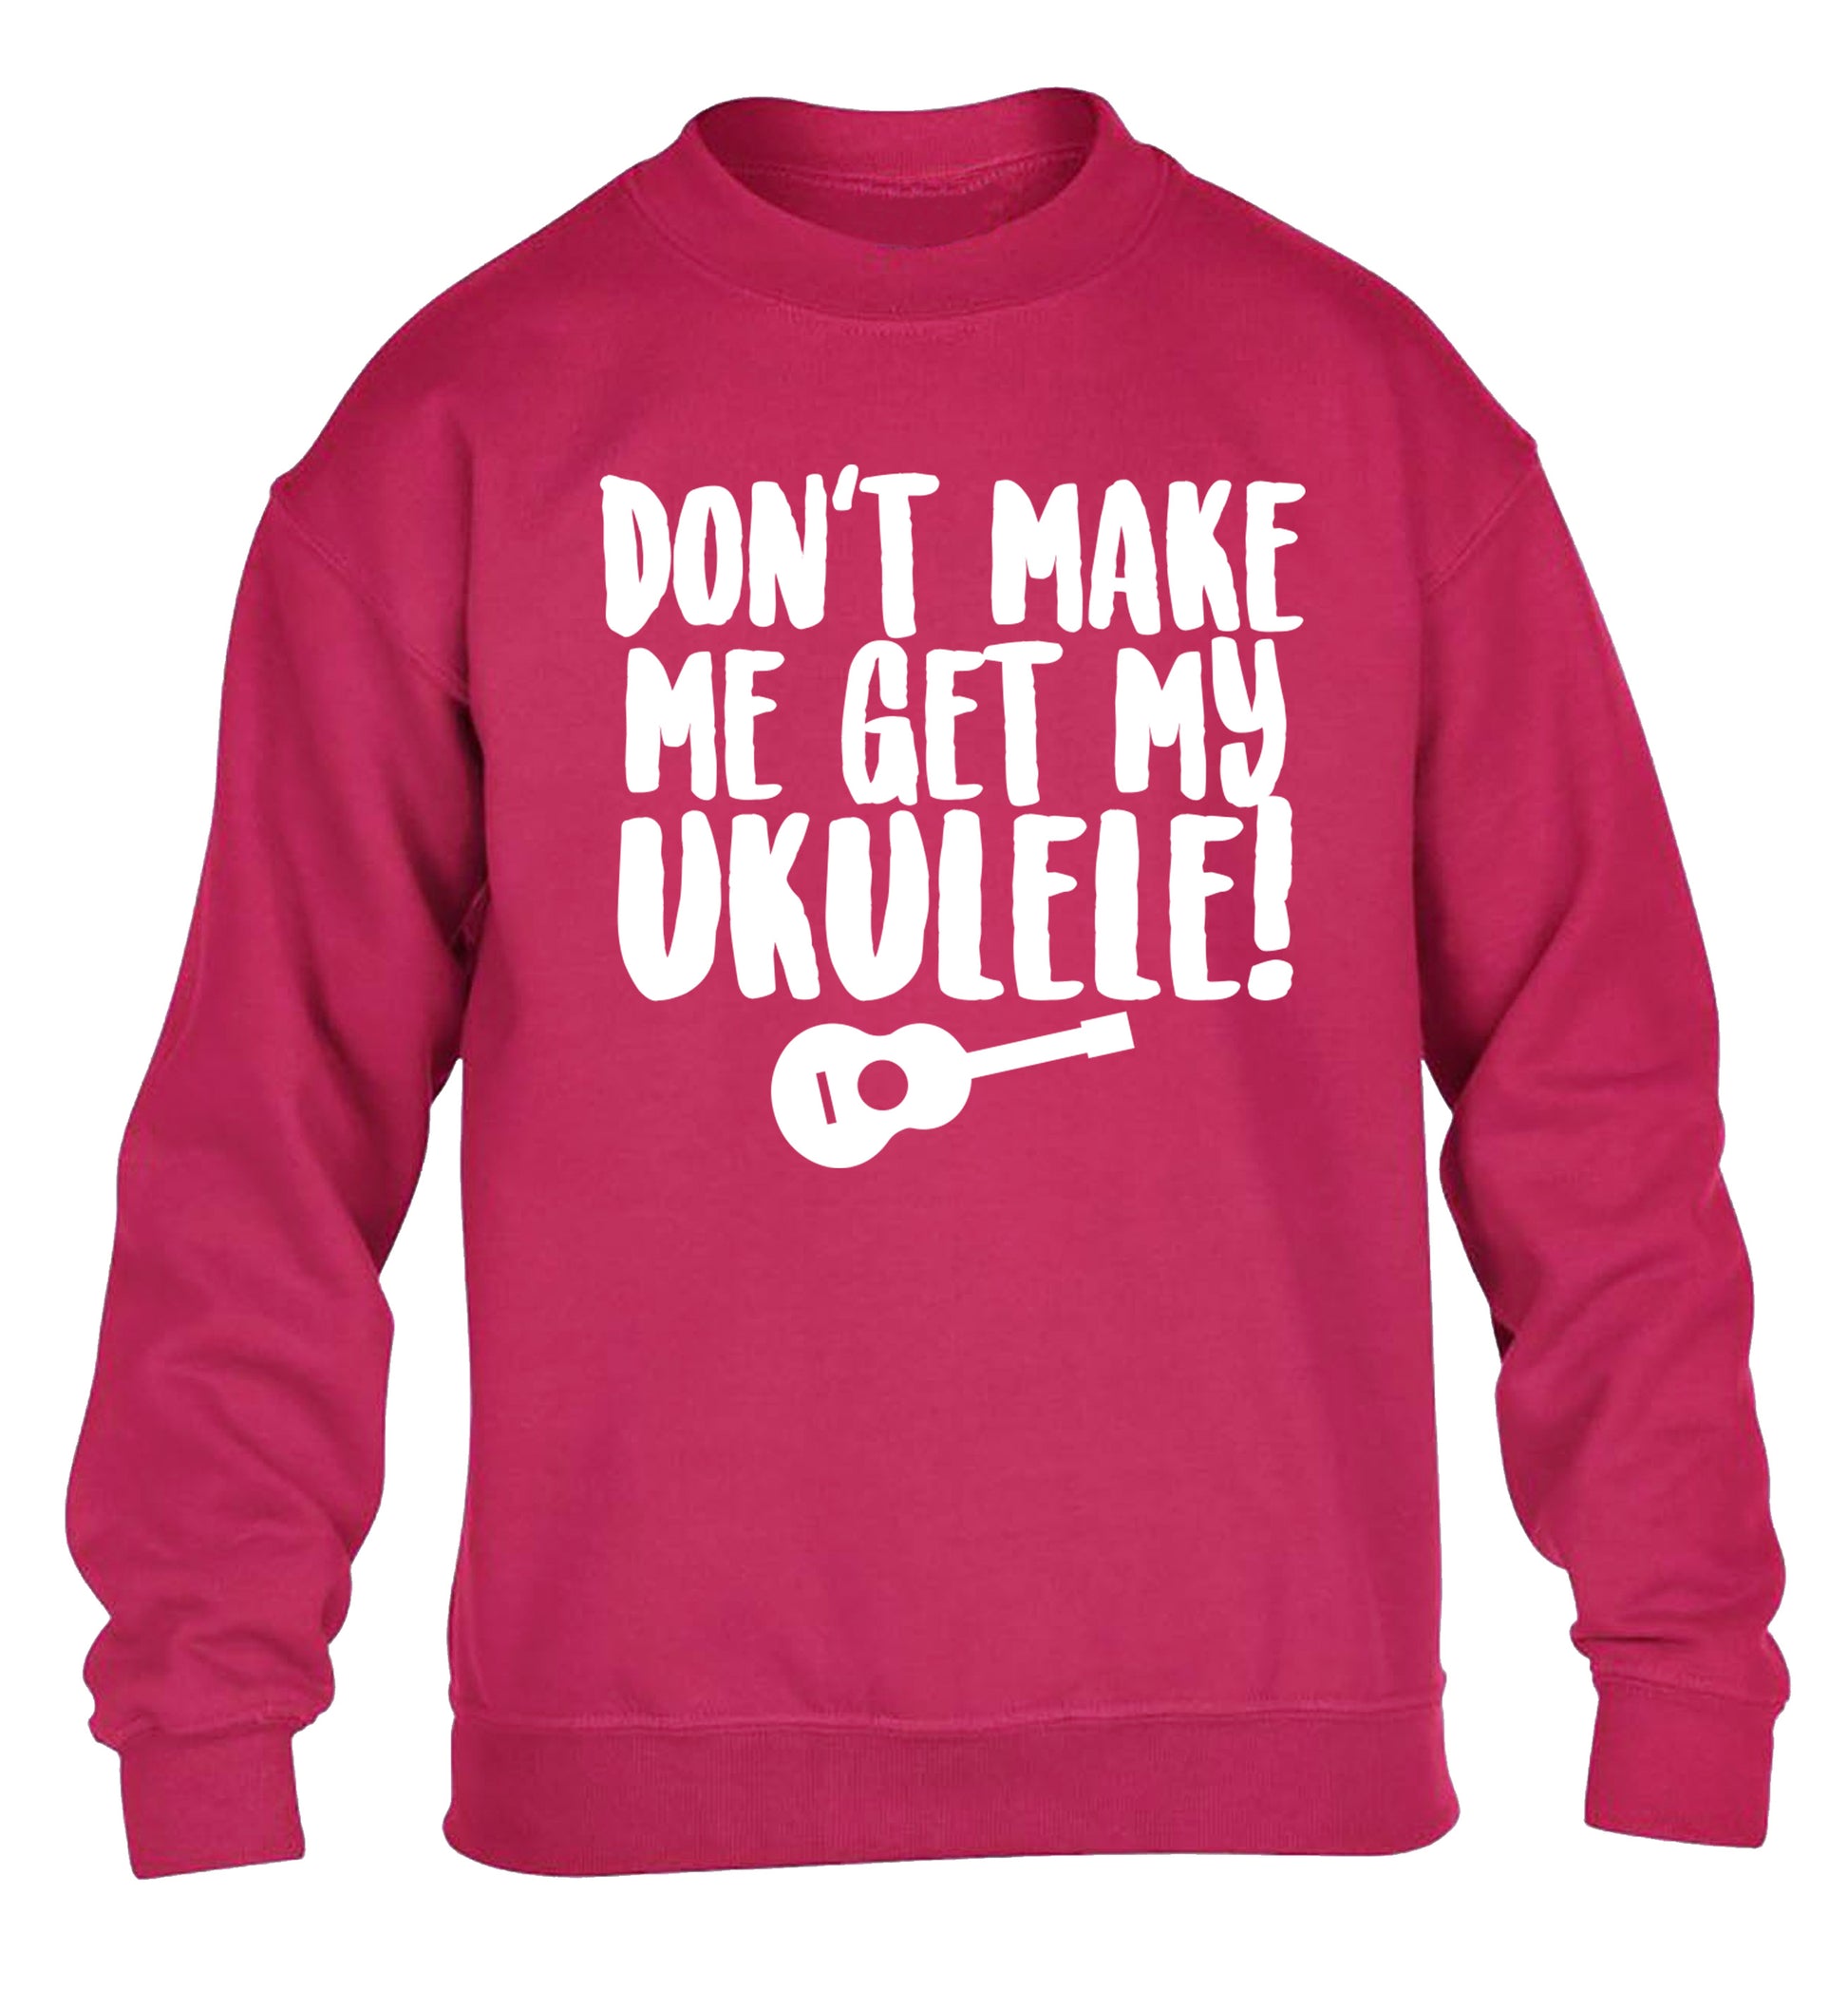 Don't make me get my ukulele children's pink sweater 12-14 Years